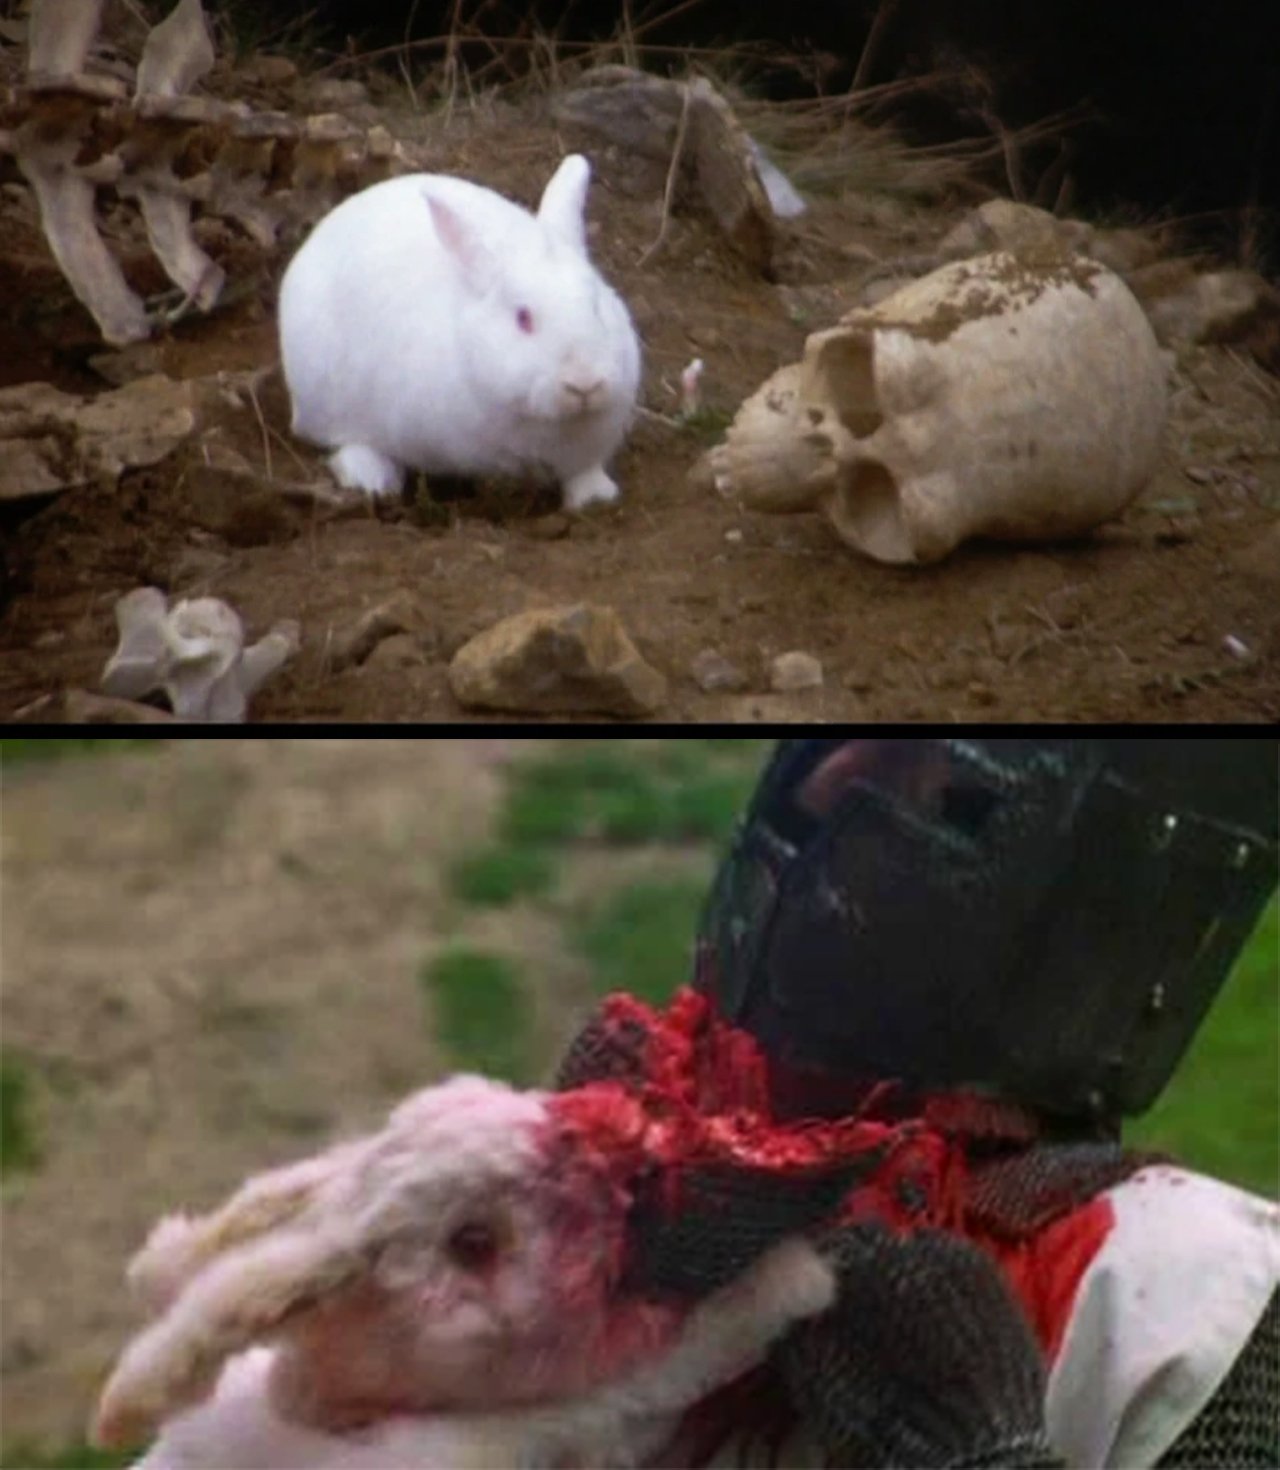 A two-panel image of a white rabbit and a person in a knight’s armor. The top panel shows the rabbit sitting on the ground with bones and a skull. The bottom panel shows the rabbit biting the neck and killing the knight, in a bloody scene.